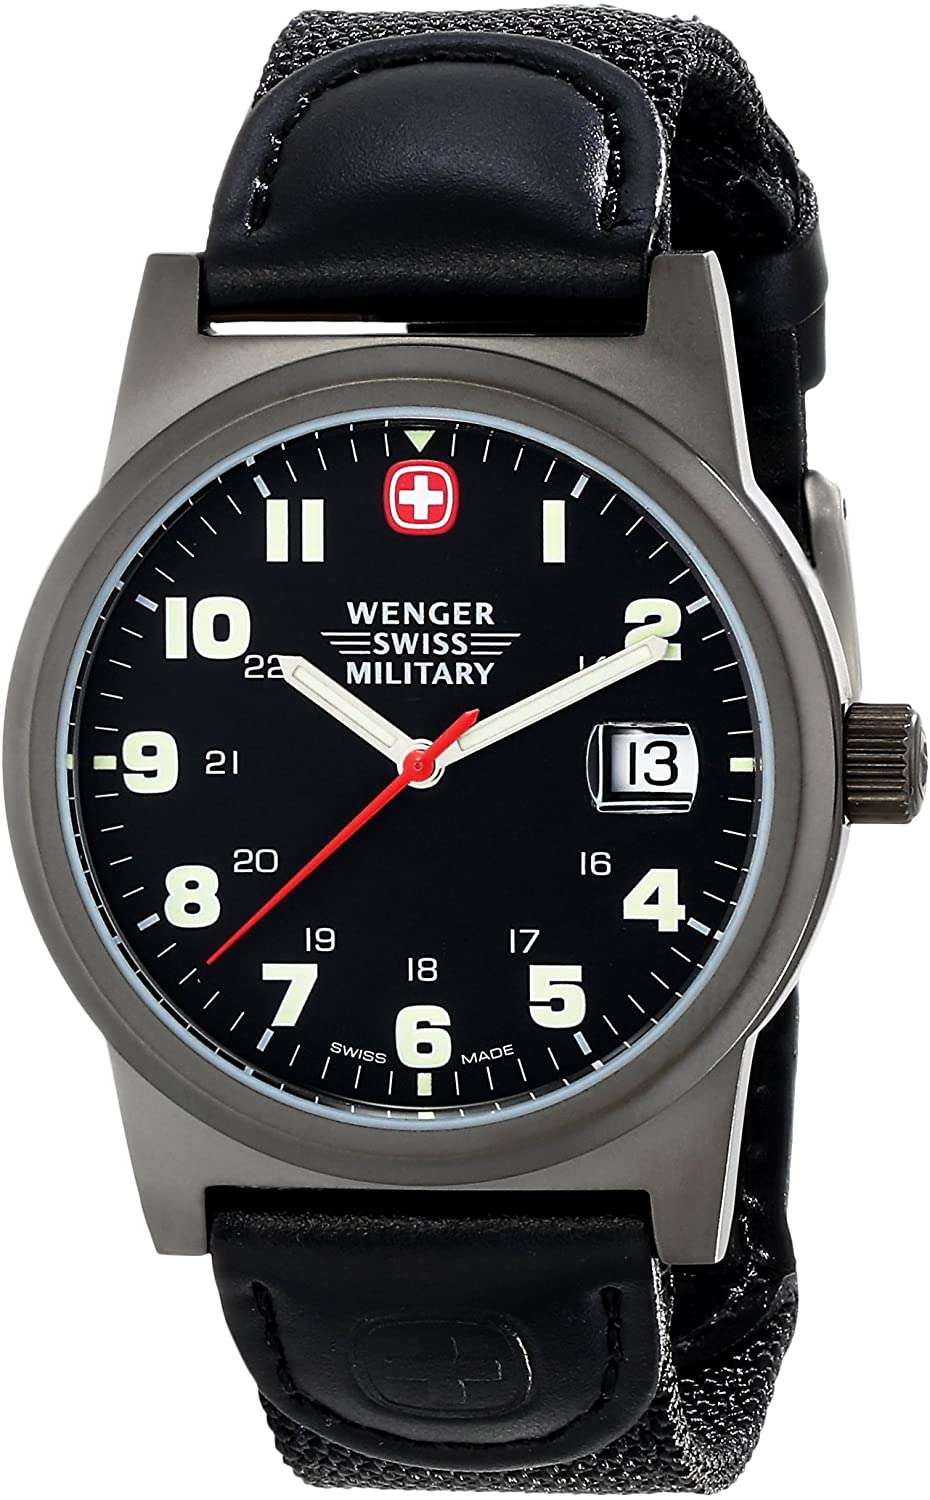 The Best Swiss Military Watches [Updated 2022] | Reload Your Gear